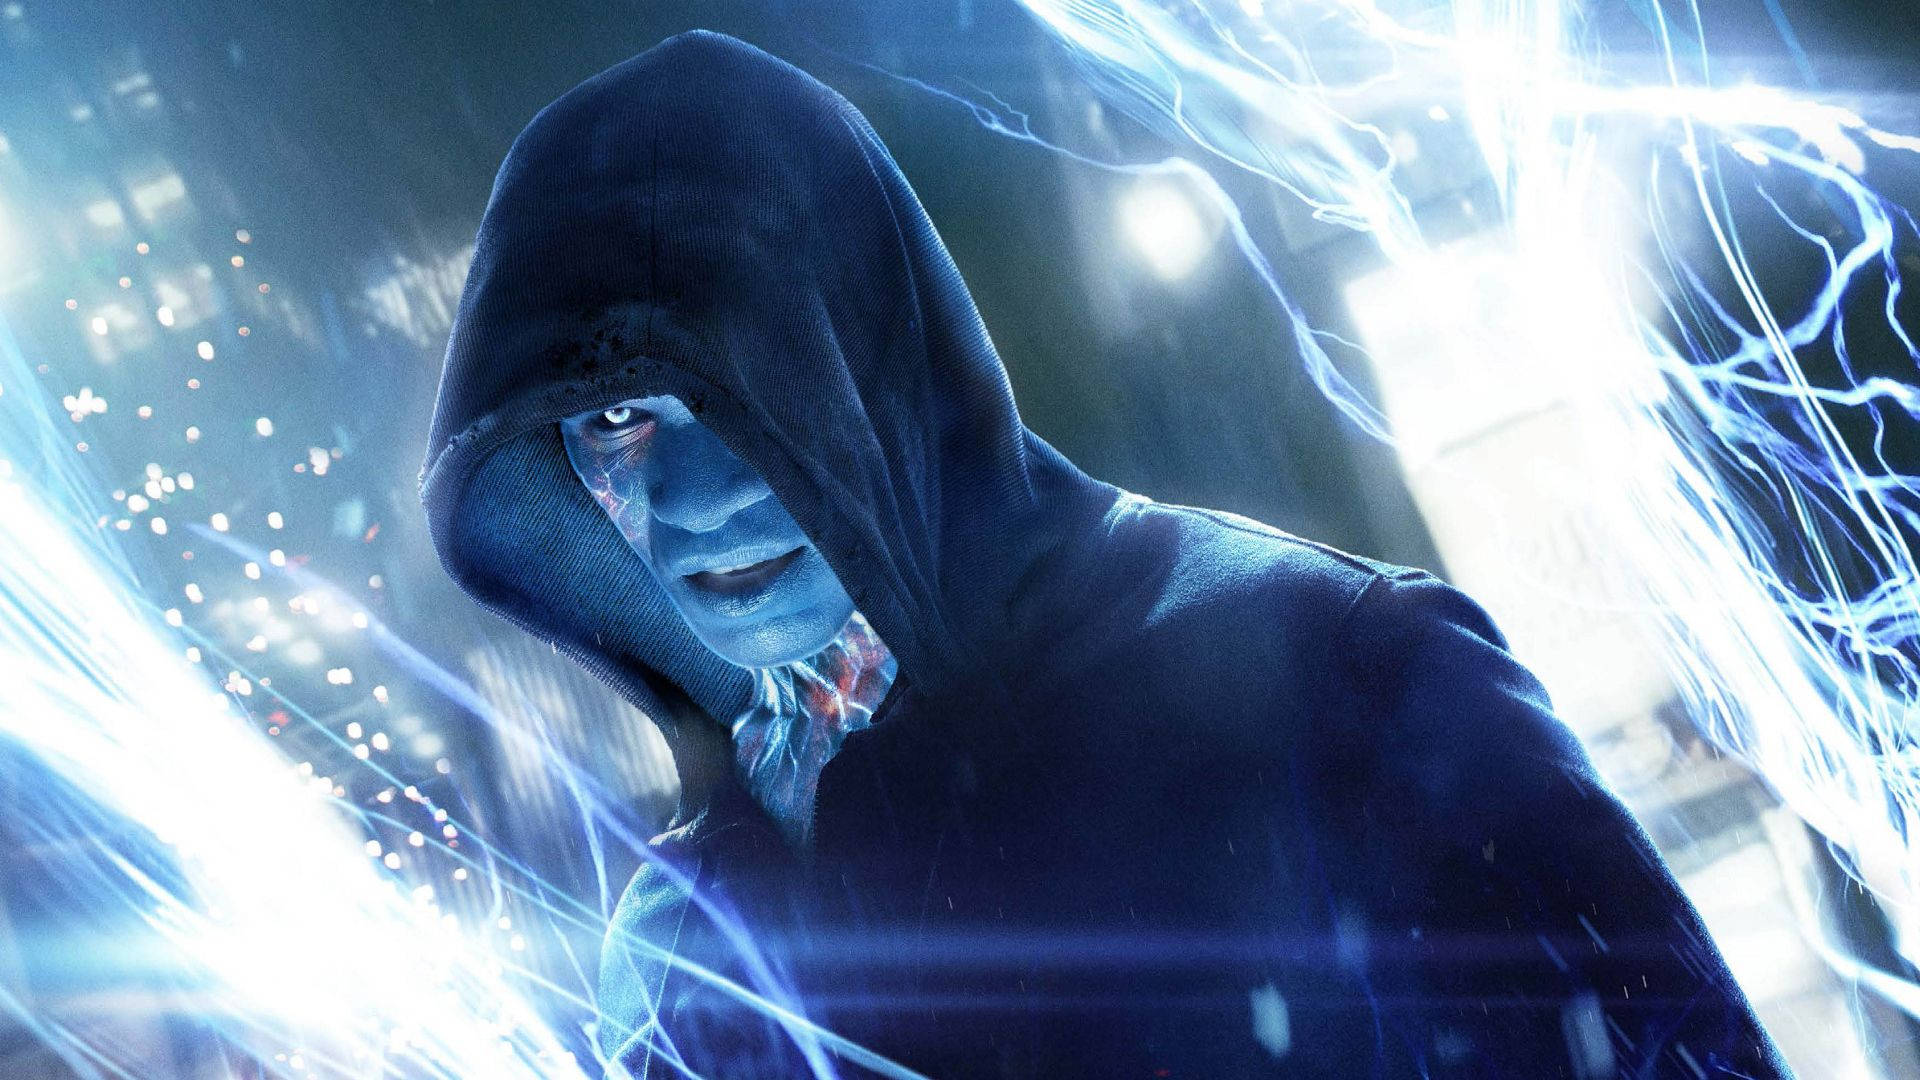 Jamie Foxx as Electro in The Amazing Spider-Man 2 Wallpaper